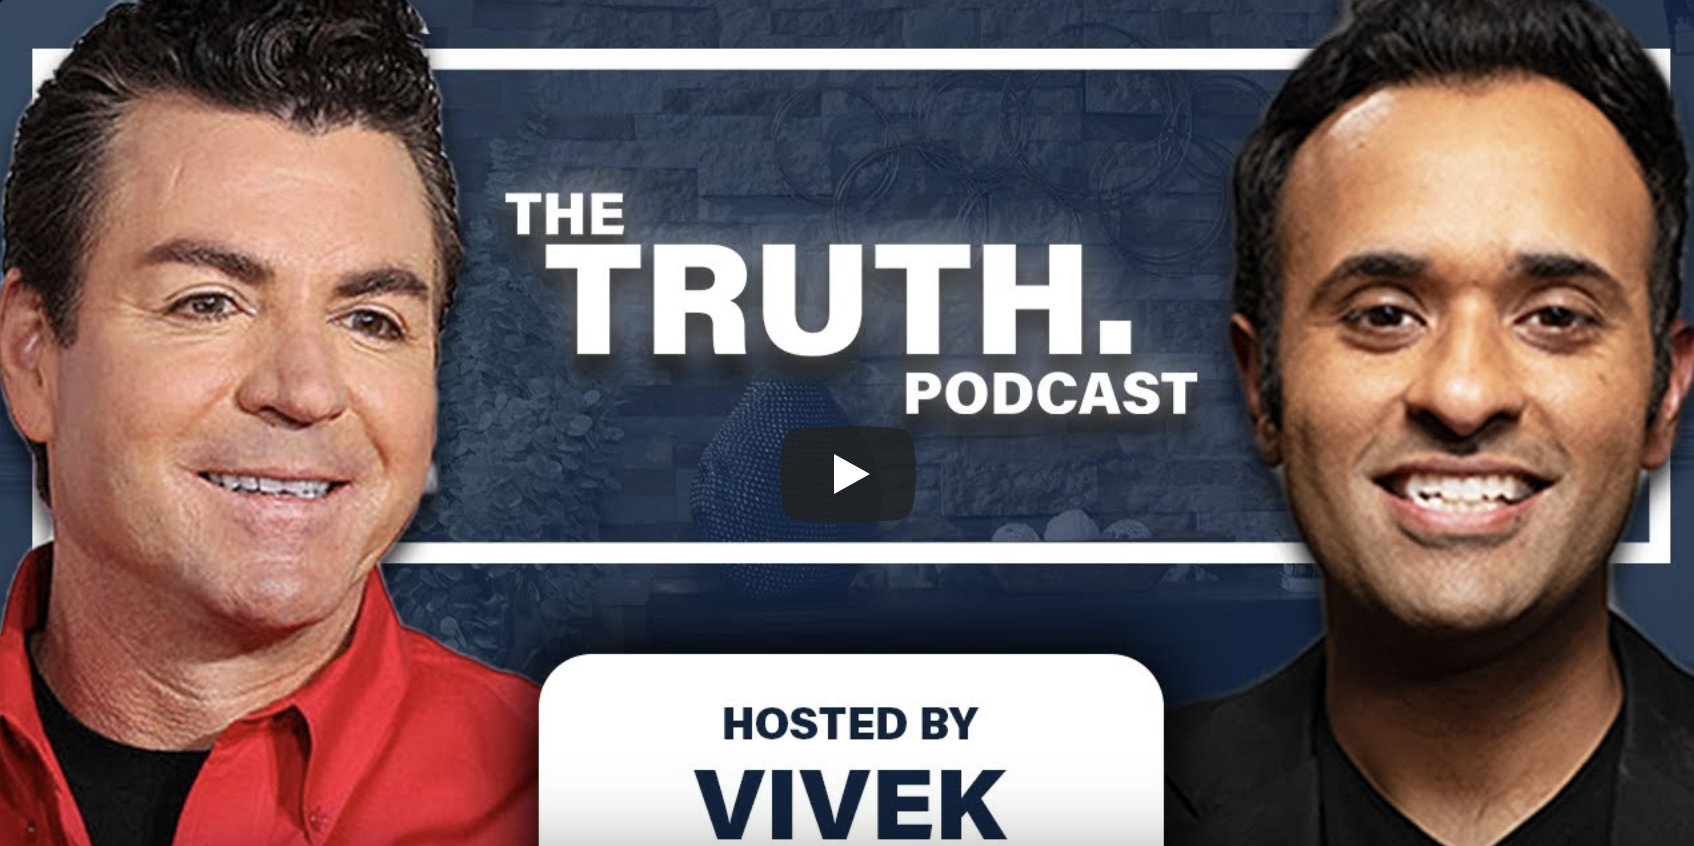 Papa John Schnatter featured on The Truth. Podcast with Vivek Ramaswamy